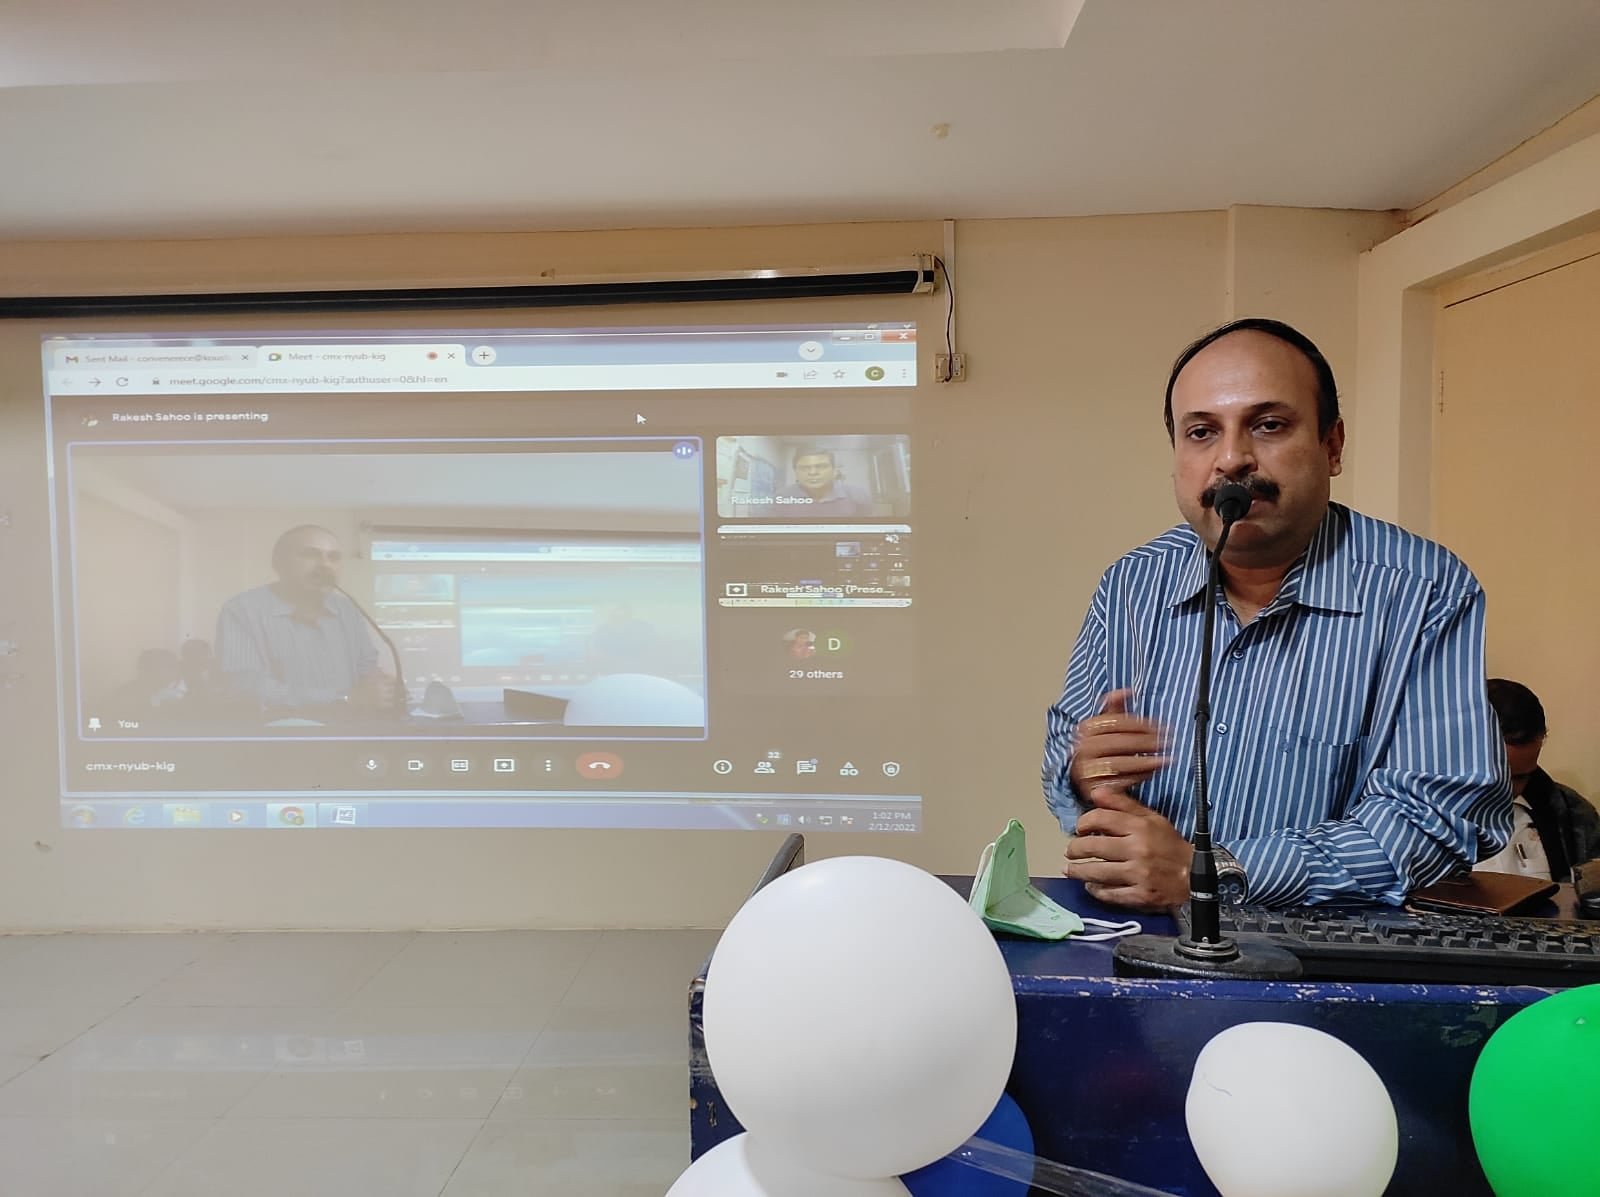 Valedictory ceremony of National Level webinar on the topic ‘Key technology in wireless communication: AI (Artificial Intelligence) the frontliner’ conducted on 12th February 2022 at COEB Conference Hall. Chief resource person on this occasion was Shri Rakesh Kumar Sahoo, Dept. of CMTC BSNL, Odisha. In his address, he explained vividly about artificial intelligence and its implications on wireless communication. He focuses on evolution of wireless communication from 1st generation to 6th generations. He further explained the various difficulties faced in each generation and the corresponding improvements made in the next generation. Various advanced techniques used in present generation that helped in augmentation of data range were also discussed.
In his address, Shri Koustuv Mallick, Trustee NDET, said that 5G technology is going to be relevant in days ahead. He narrated about the implementation of wireless technology in IoT field and how the latest technology is helping in saving the power with increased efficiency.
At the beginning of the valedictory ceremony, welcome address was given by Prof. (Dr.) Loknath Sarangi, Convener - NWKTWC – 2022. In his address Prof. (Dr.) Subrat Kumar Mohanty, Principal COEB said that the session has touched almost all aspects of Artificial Intelligence. At the end, the vote of thanks proposed by Prof. Snehasis Dey, Convener - NWKTWC – 2022. This webinar was attended by around 69 students. Research Scholars and faculties from numerous institutes of India have participated in this webinar.